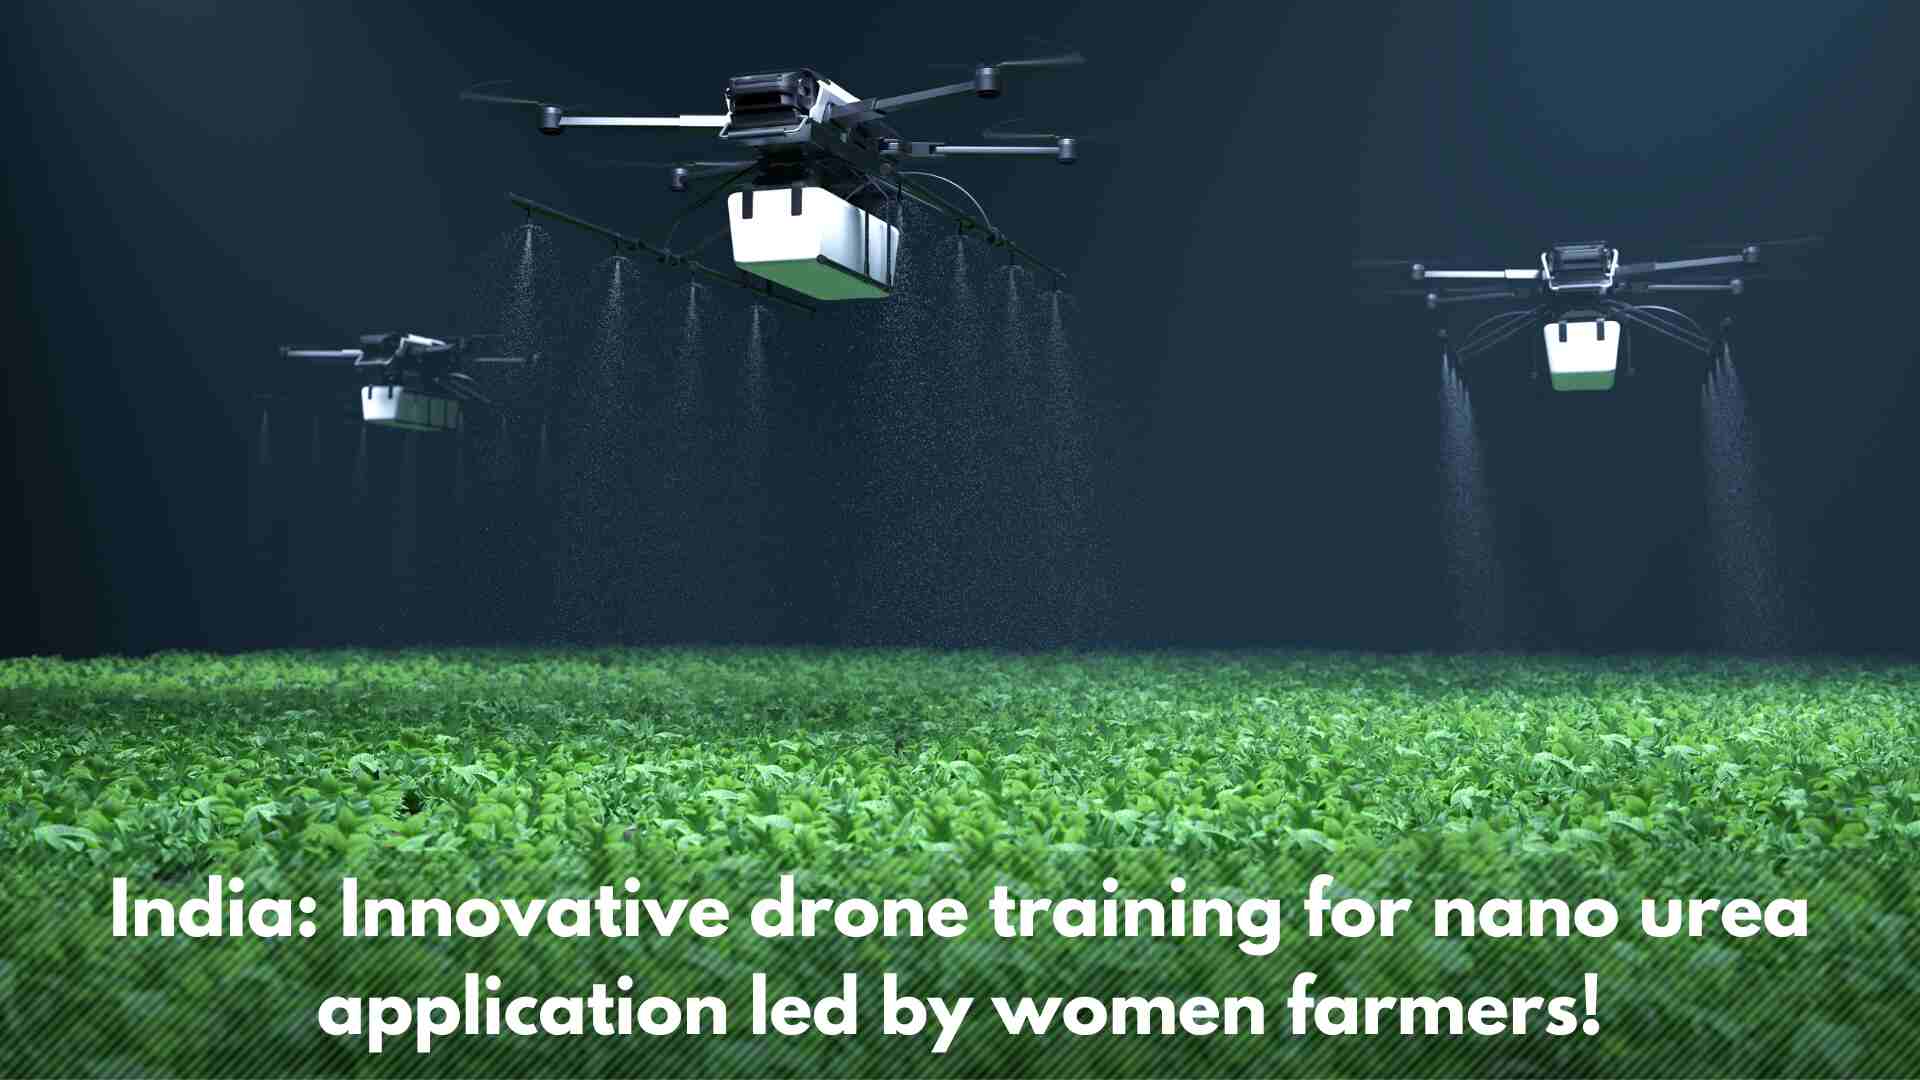 Government has introduced a new program to empower women farmers through drone technology